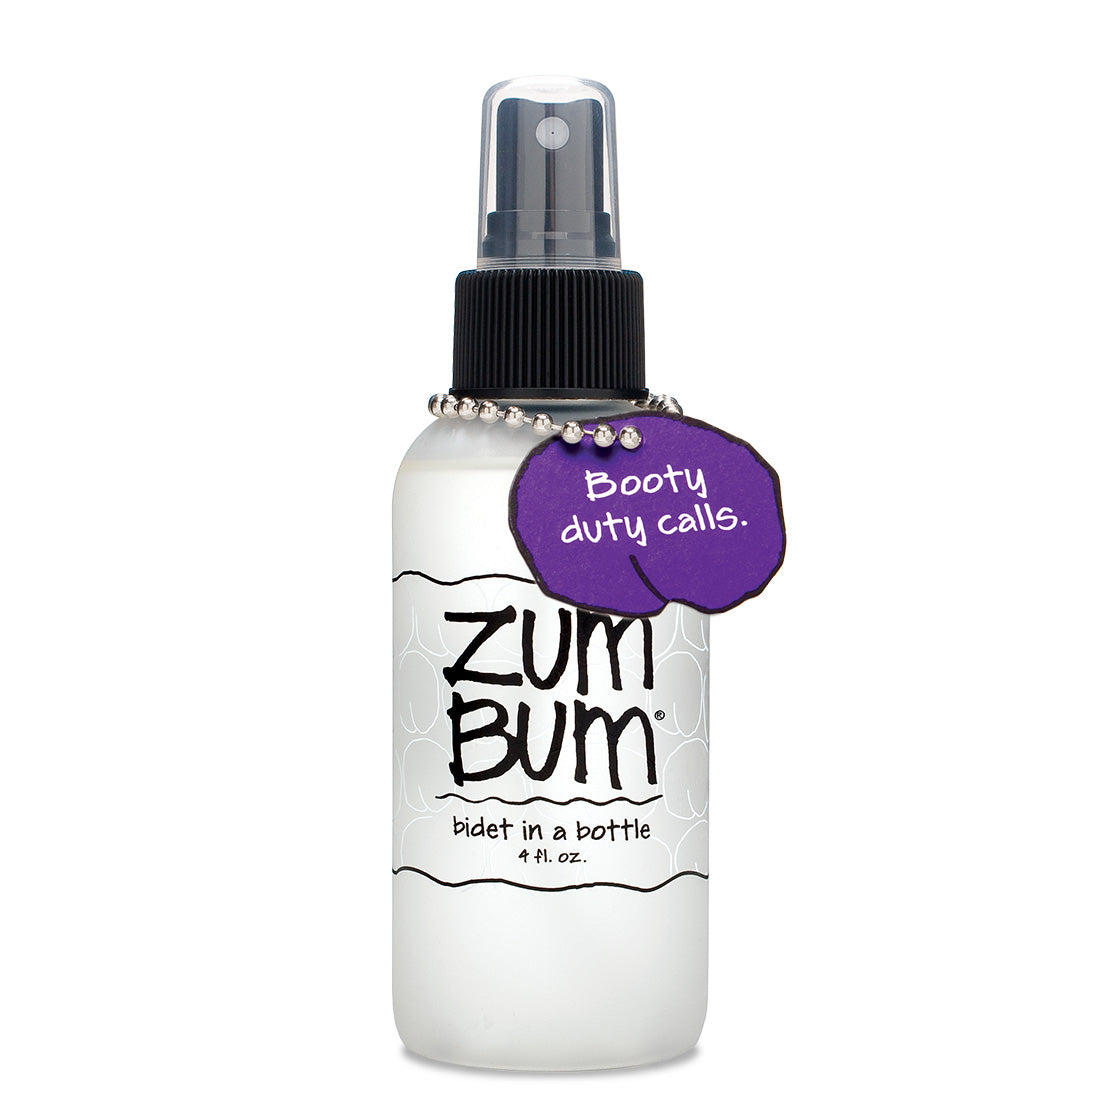 Cylinder bottle with spray pump that contains Zum Bum bidet in a bottle and has a small hangtag.